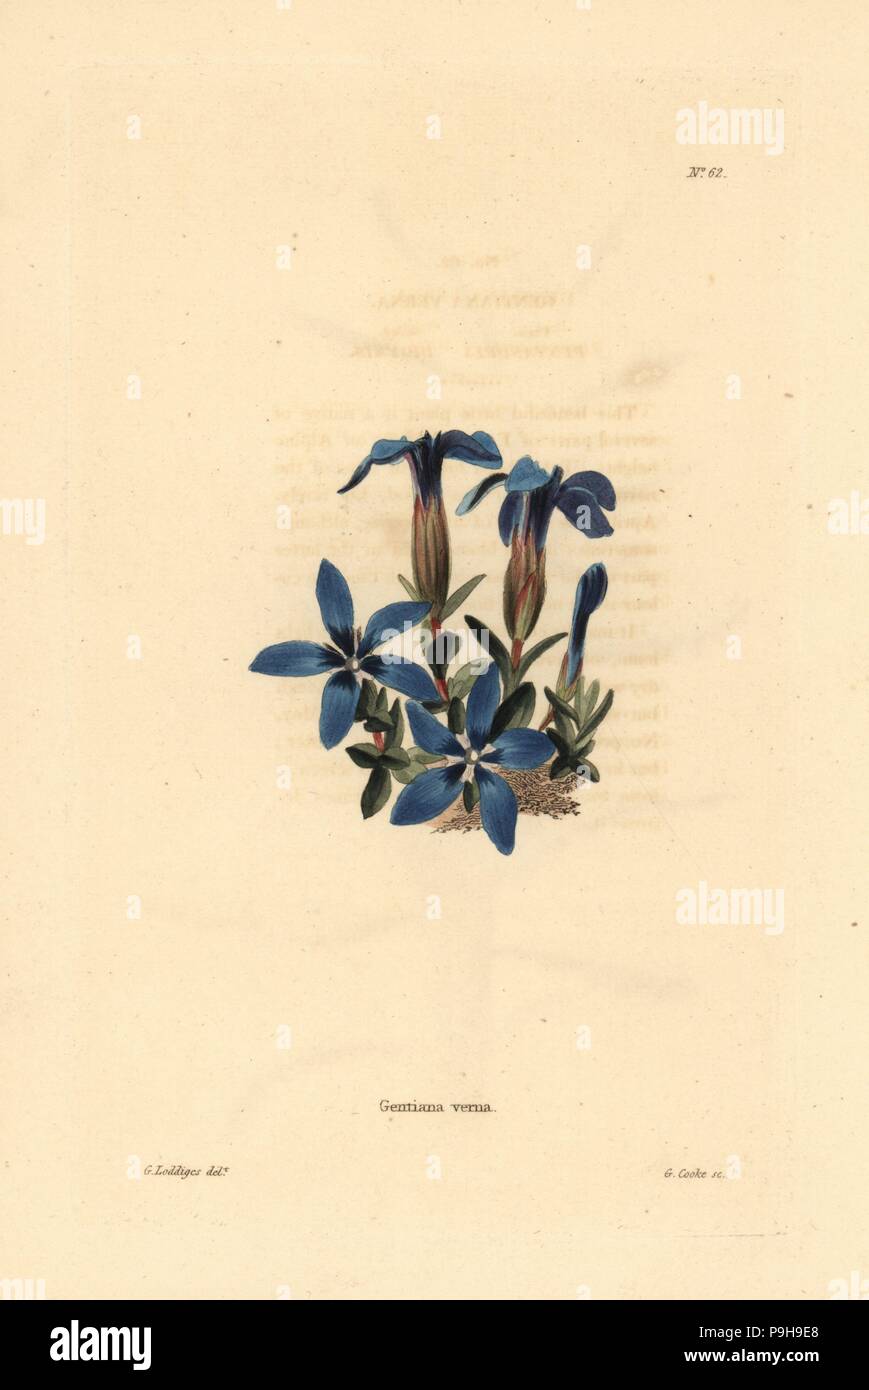 Spring gentian, Gentiana verna. Handcoloured copperplate engraving by George Cooke after George Loddiges from Conrad Loddiges' Botanical Cabinet, Hackney, 1817. Stock Photo